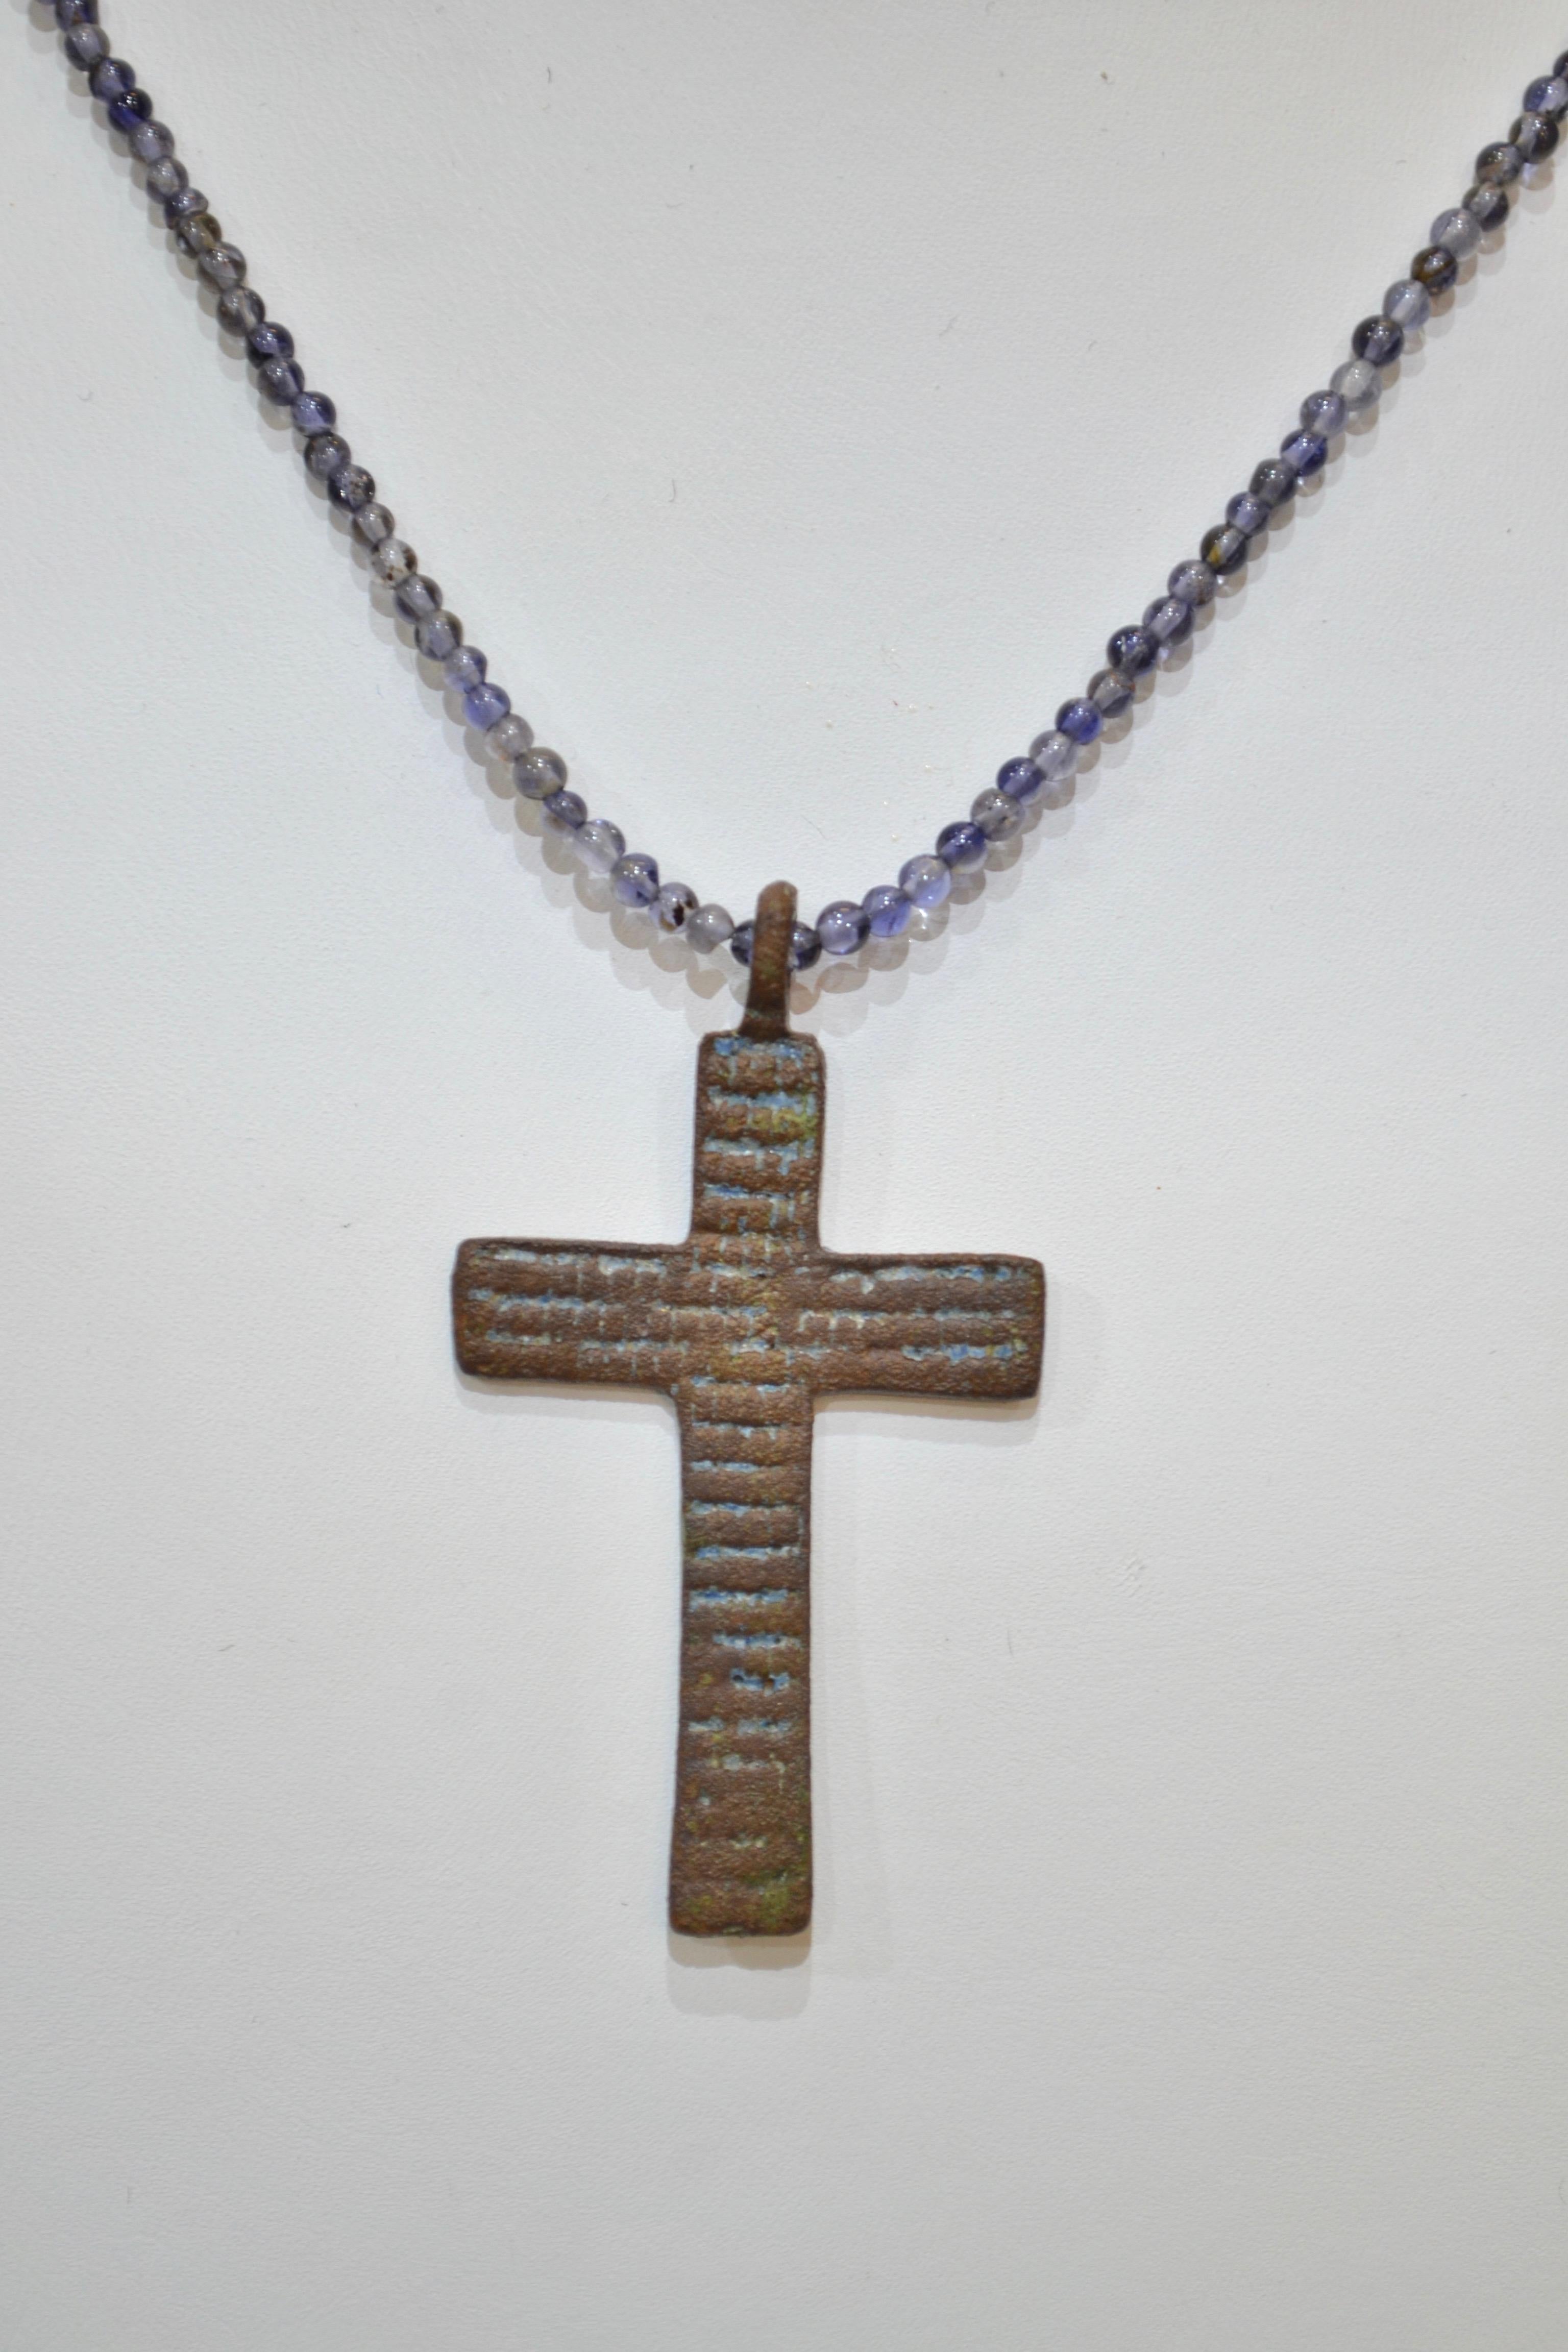 Late Medieval Bronze Cross with Enamel. Professionally cleaned and polished to show original details. Mounted on beautiful polite beaded necklace.